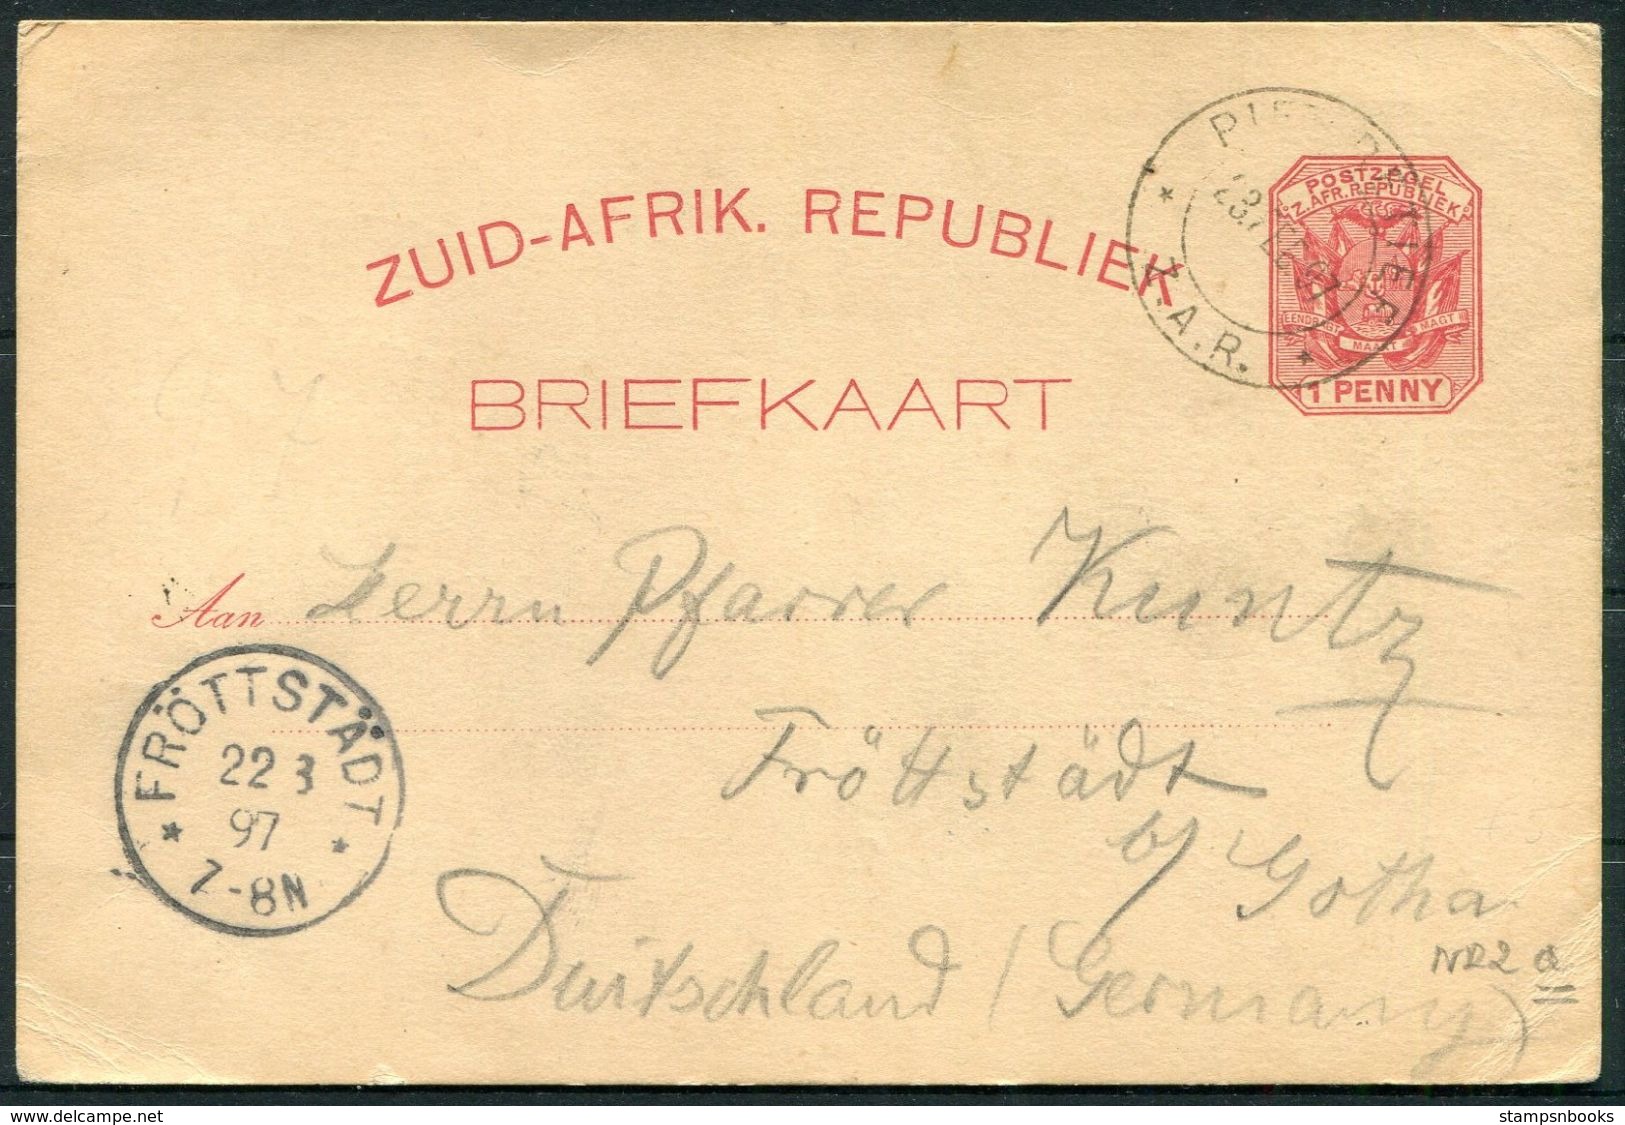 1897 South Africa Z.A.R. Stationery Postcard - Frottstadt Germany - New Republic (1886-1887)